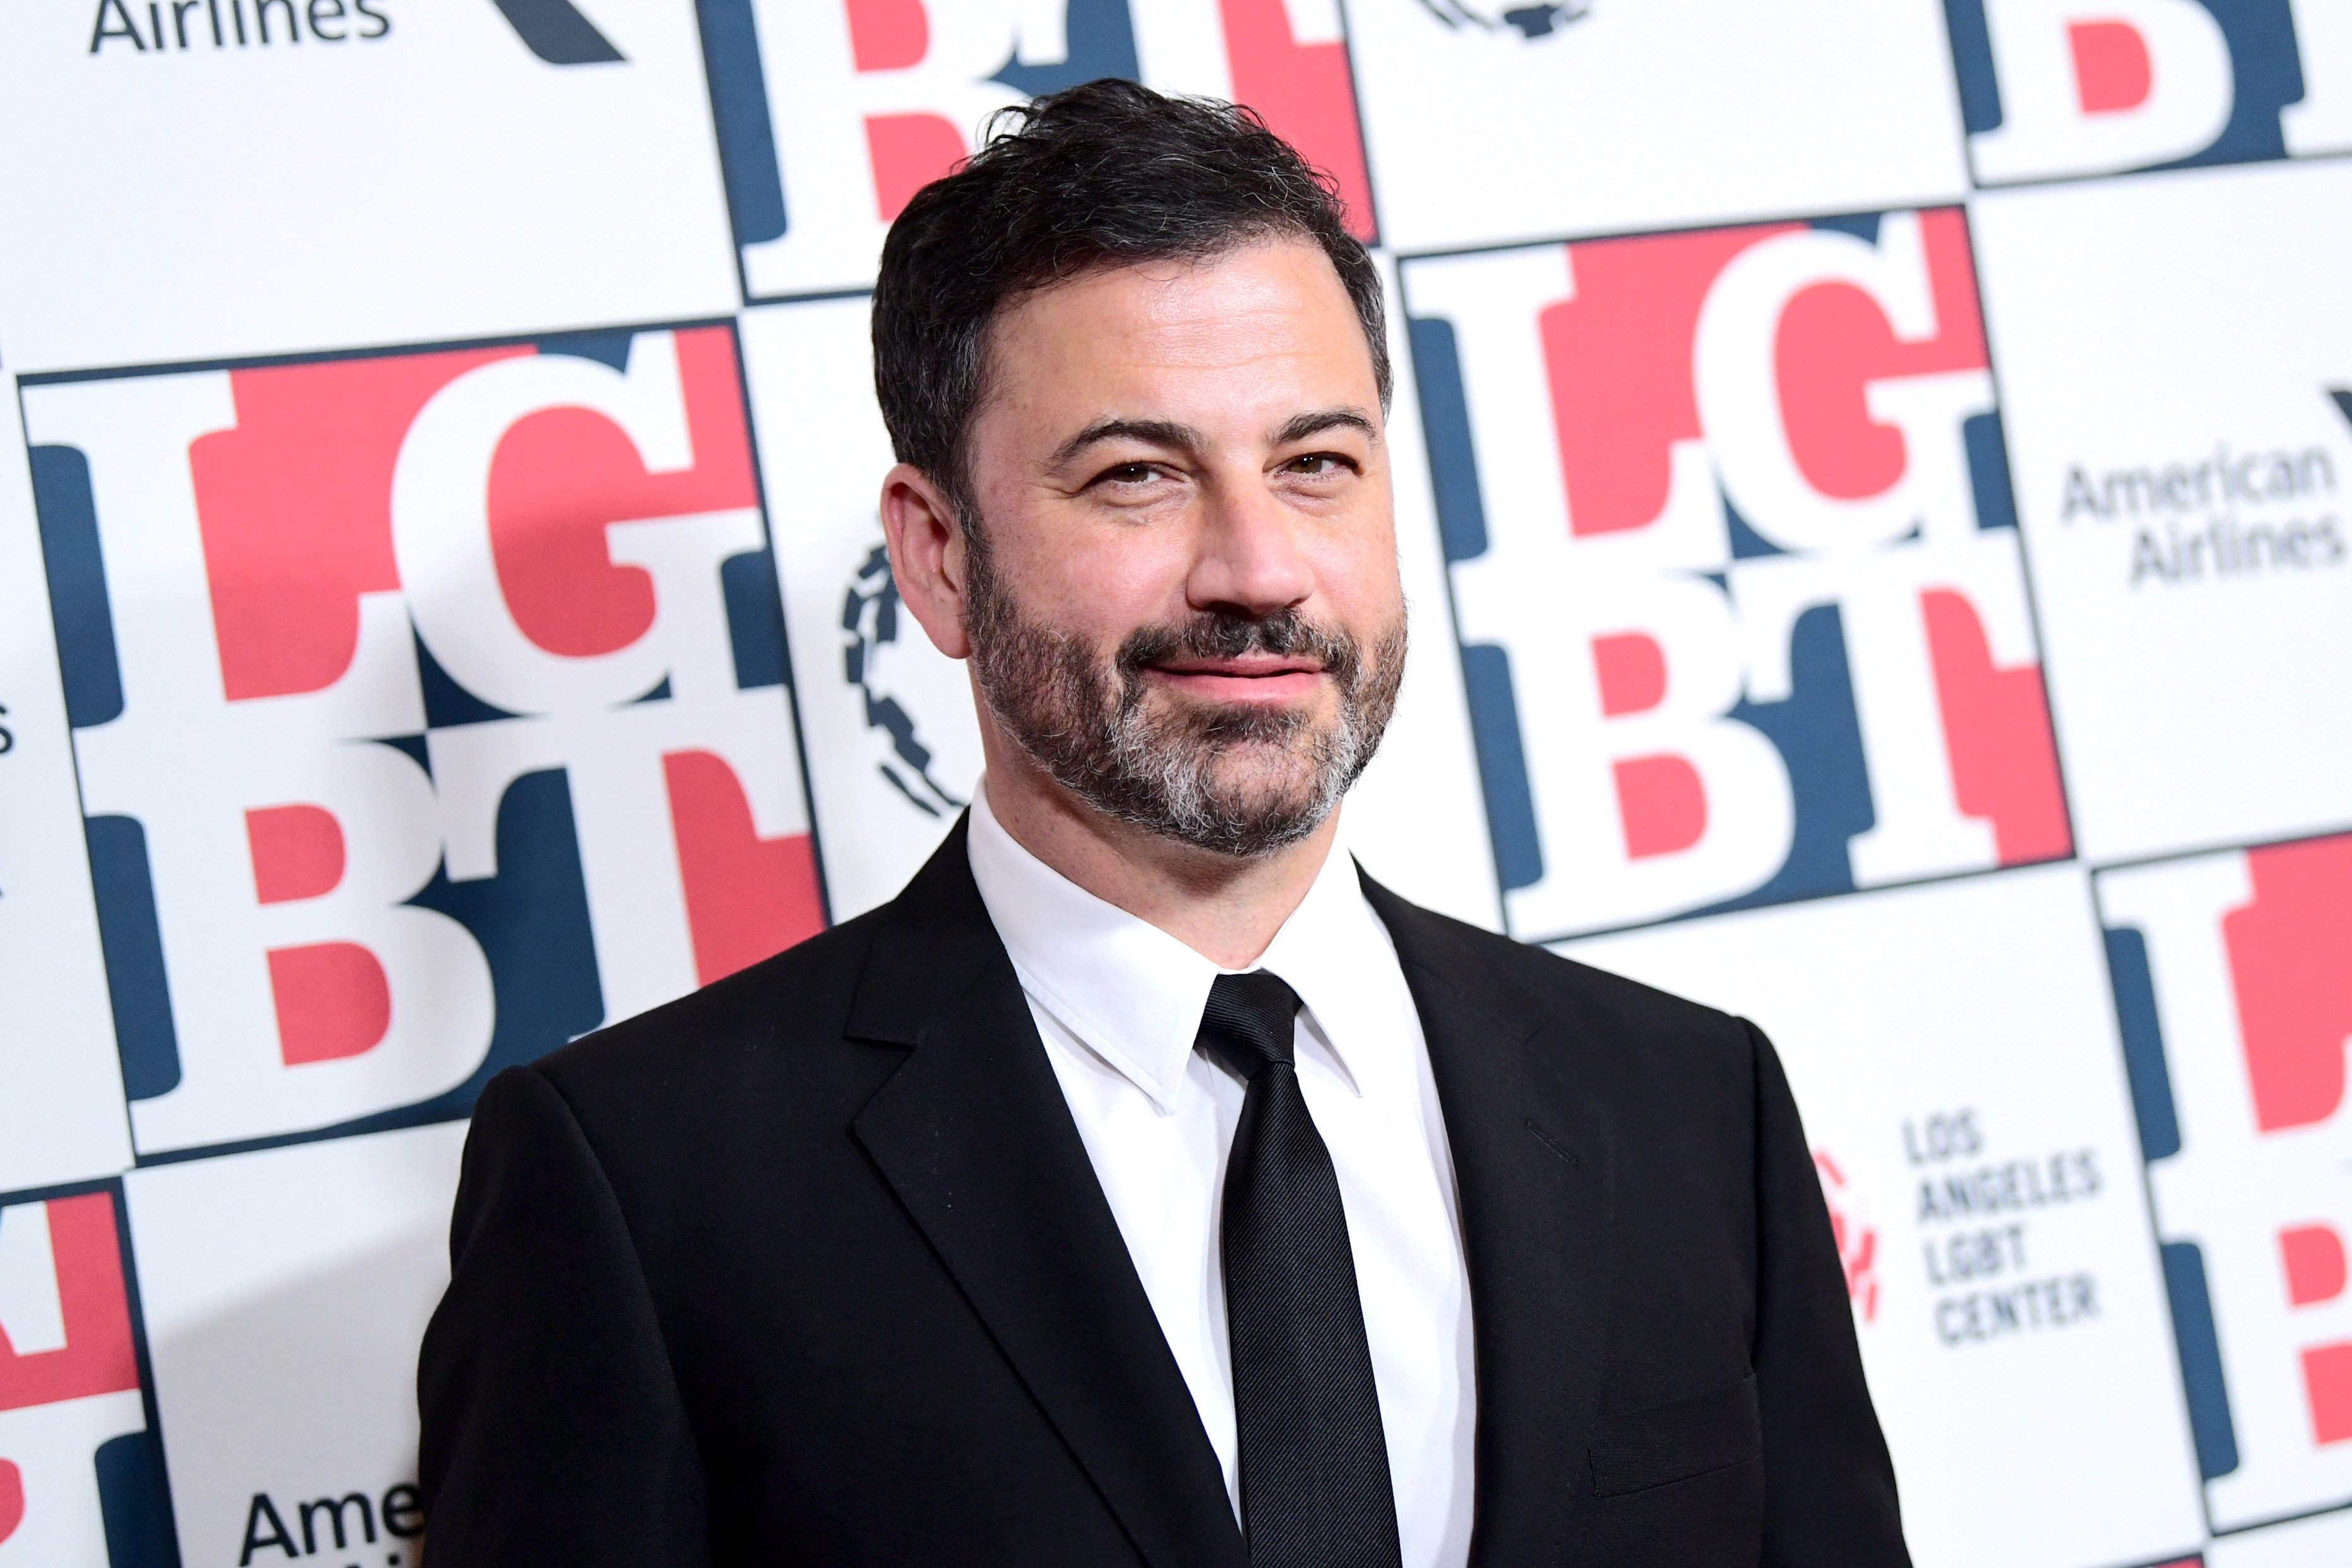 Jimmy Kimmel attends Los Angeles LGBT Center's 48th Anniversary Gala Vanguard Awards at The Beverly Hilton Hotel on September 23, 2017 in Beverly Hills, California | Photo: Getty Images